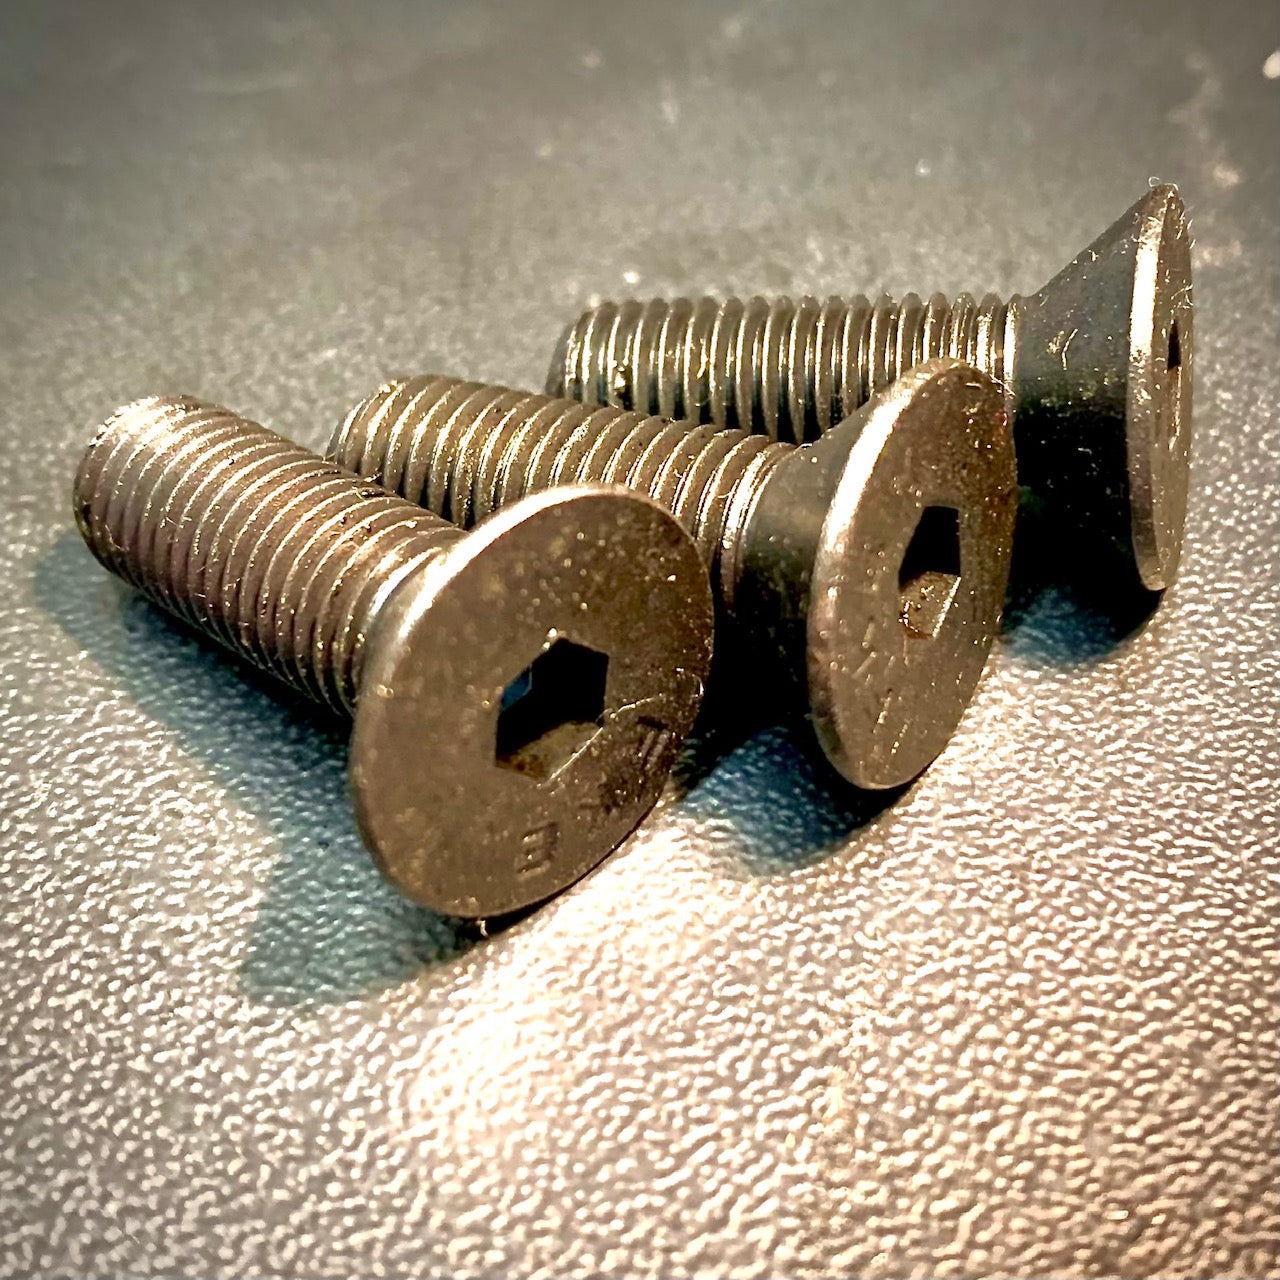 UNF 1/2" Socket Screw Countersunk High Tensile 10.9 DIN7991 - Fixaball Ltd. Fixings and Fasteners UK